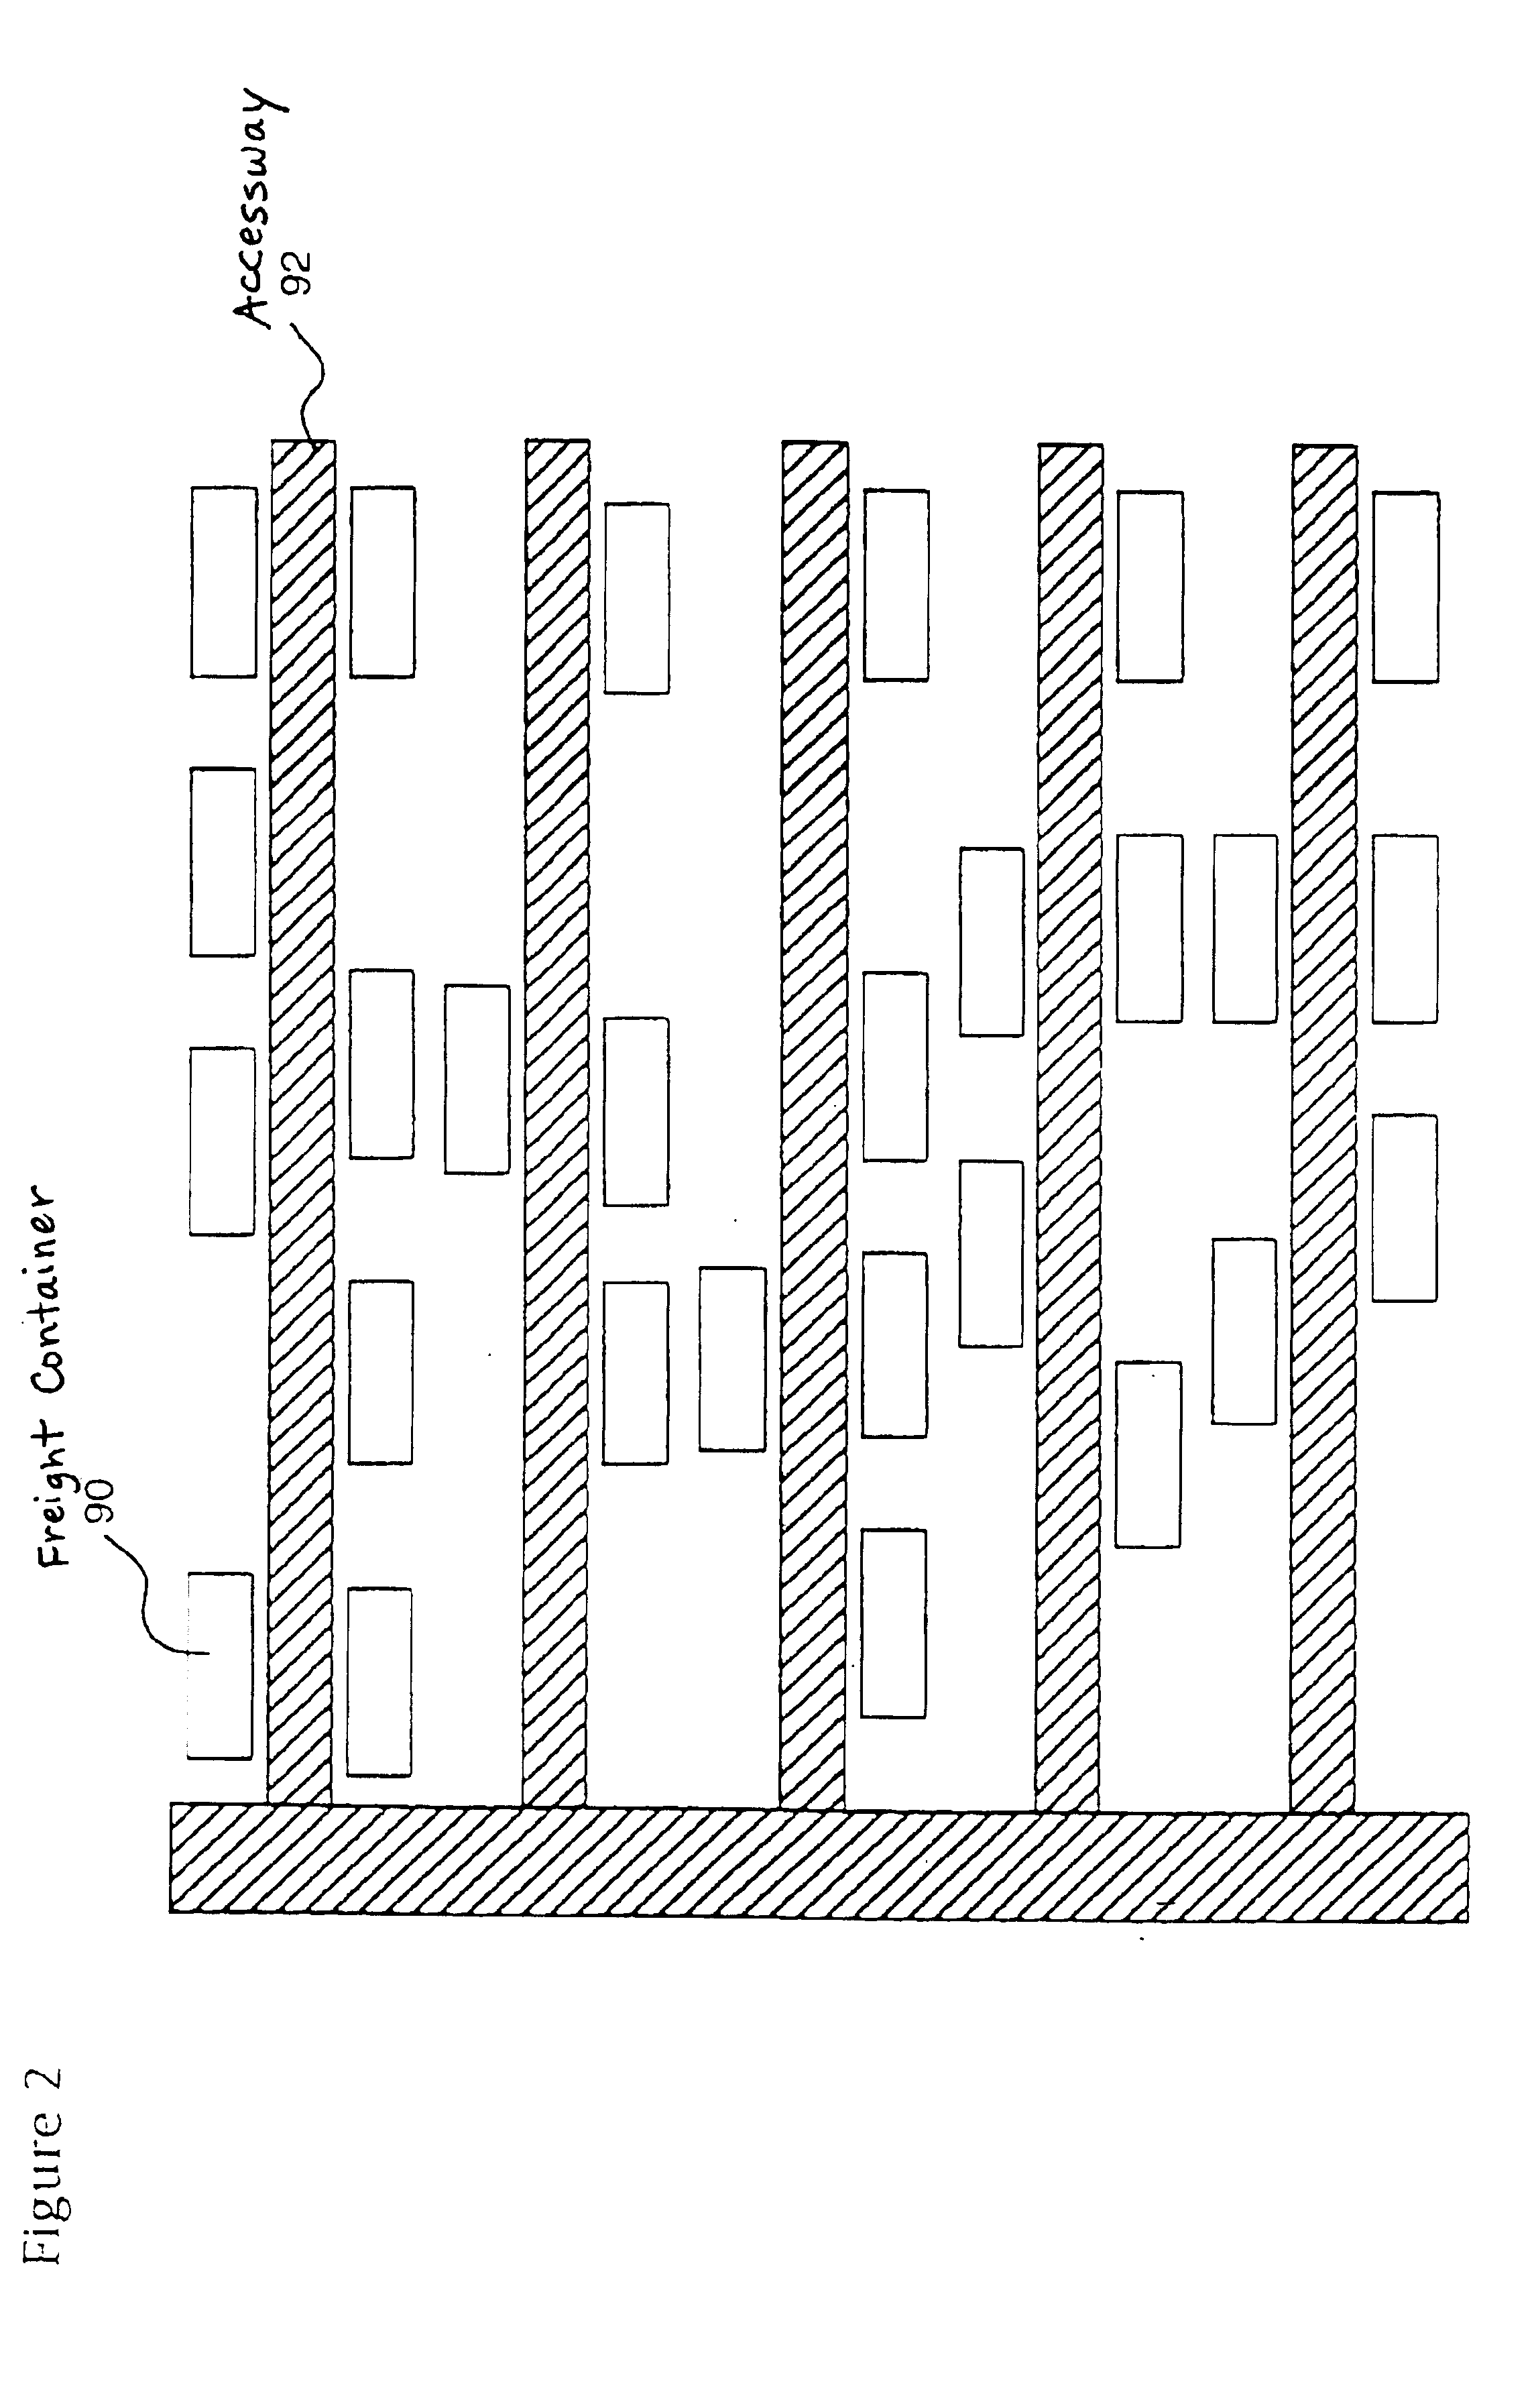 System and method for determining freight container locations